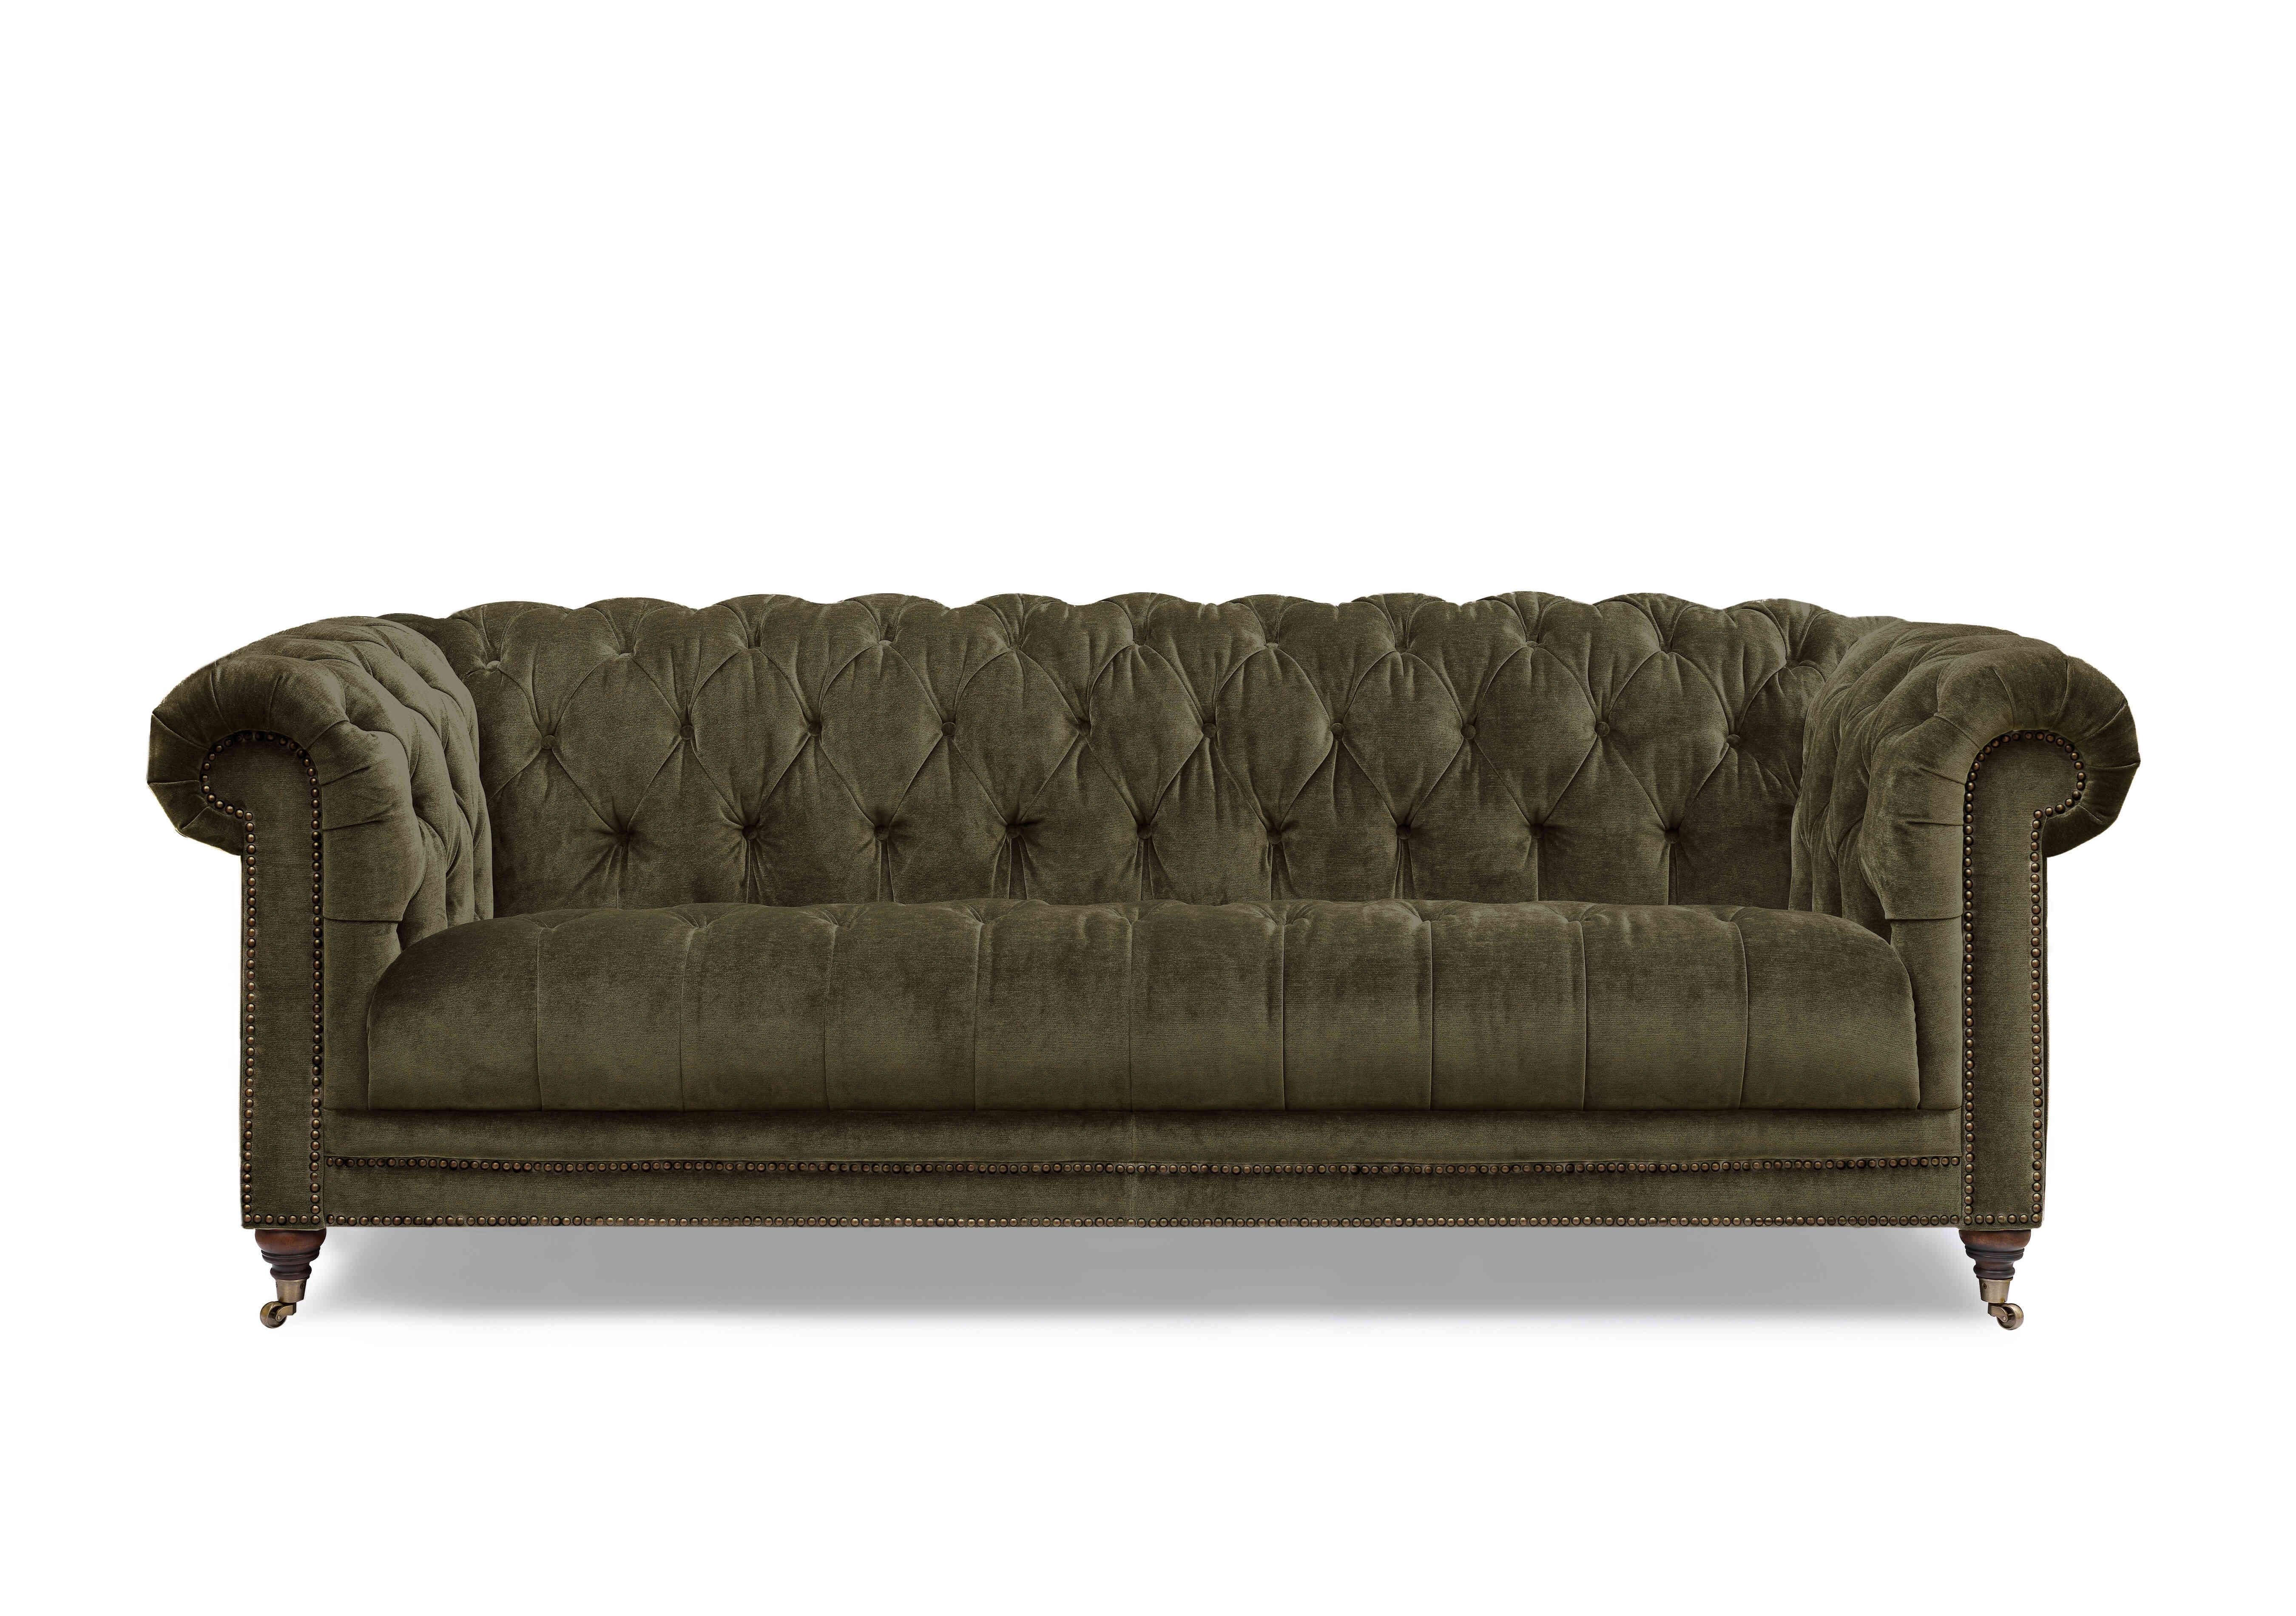 Walter 4 Seater Fabric Chesterfield Sofa in X3y1-W018 Pine on Furniture Village